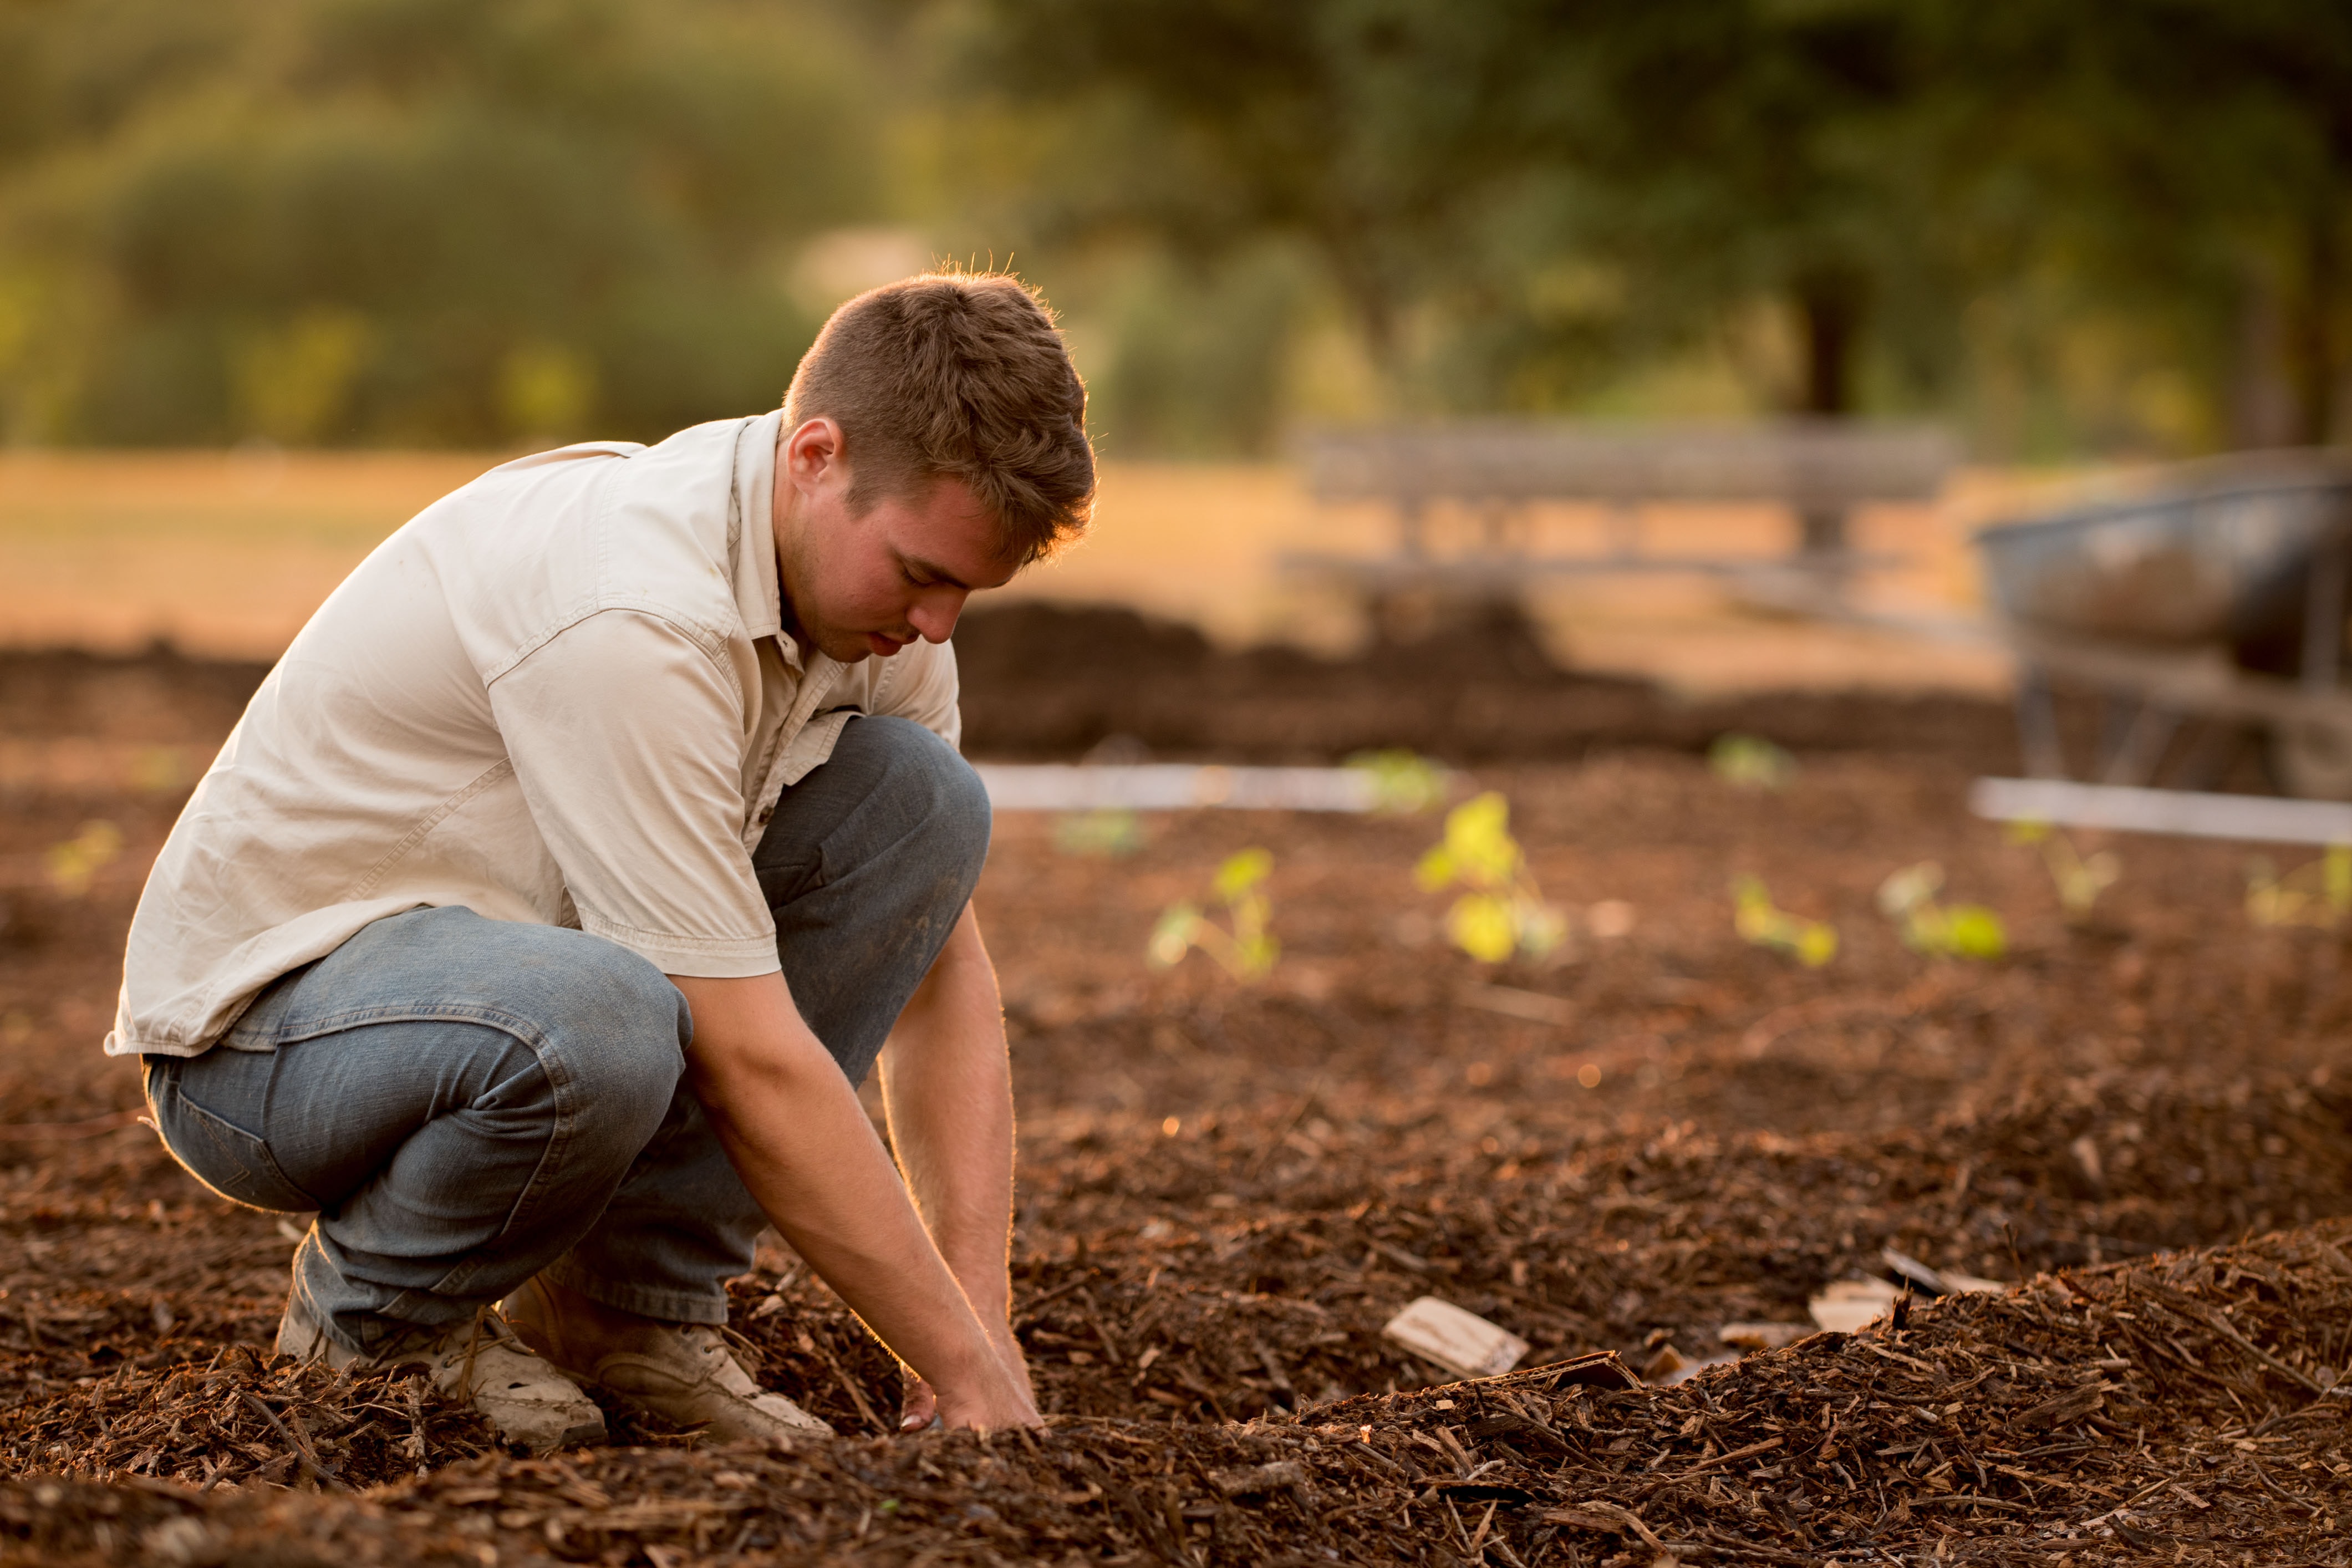 A man with brown hair in a white shirt and denim jeans, crouched down on soil attending to some crops. 